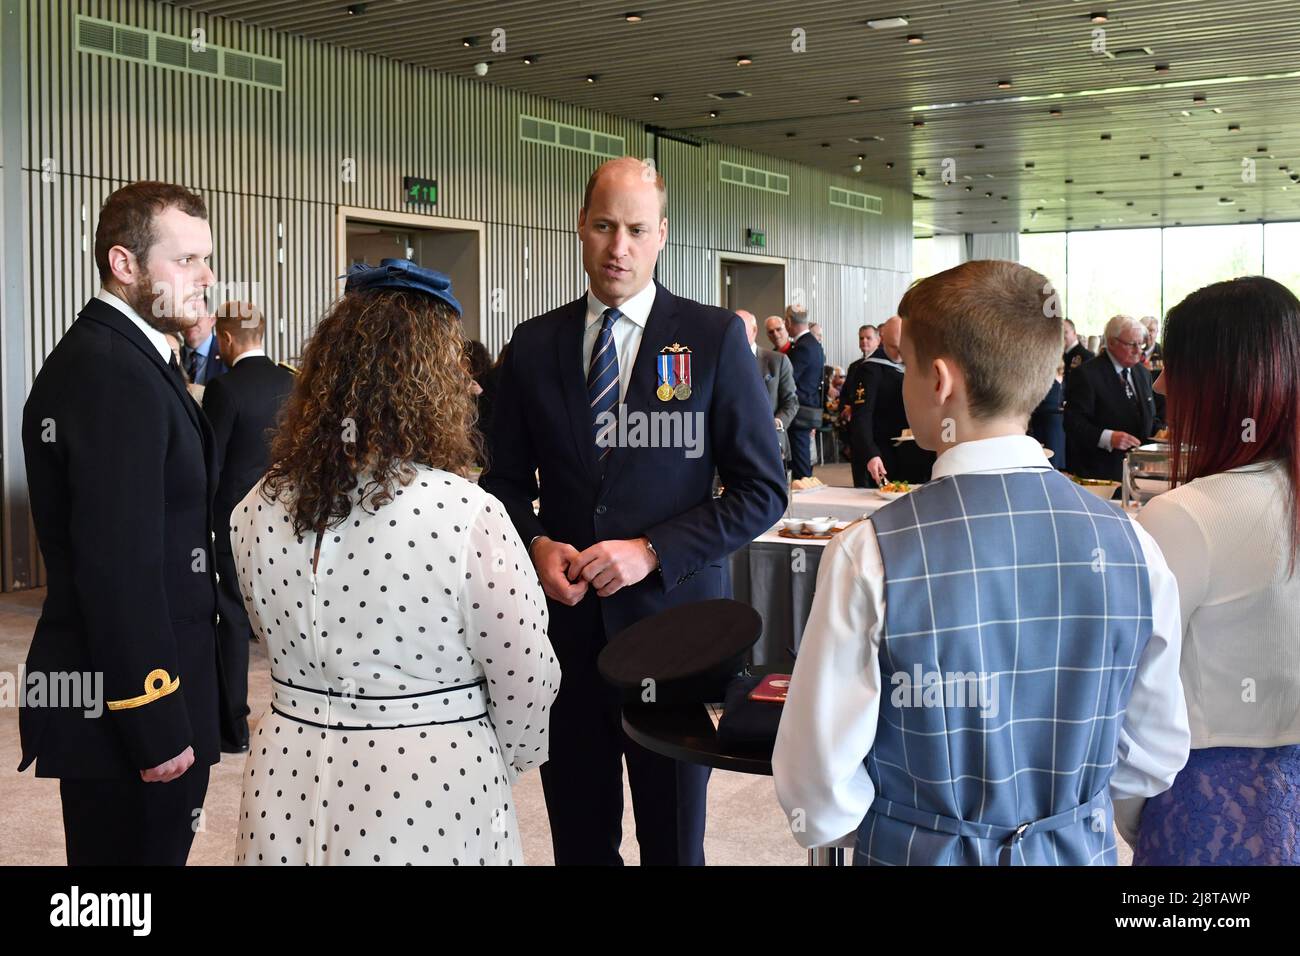 The Duke of Cambridge speaks with the family of Ian Molyneux, the Royal Navy officer who was shot in the head aboard HMS Astute in April 2011, following the unveiling of a submariners memorial at the National Memorial Arboretum in Staffordshire. Picture date: Wednesday May 18, 2022. Stock Photo